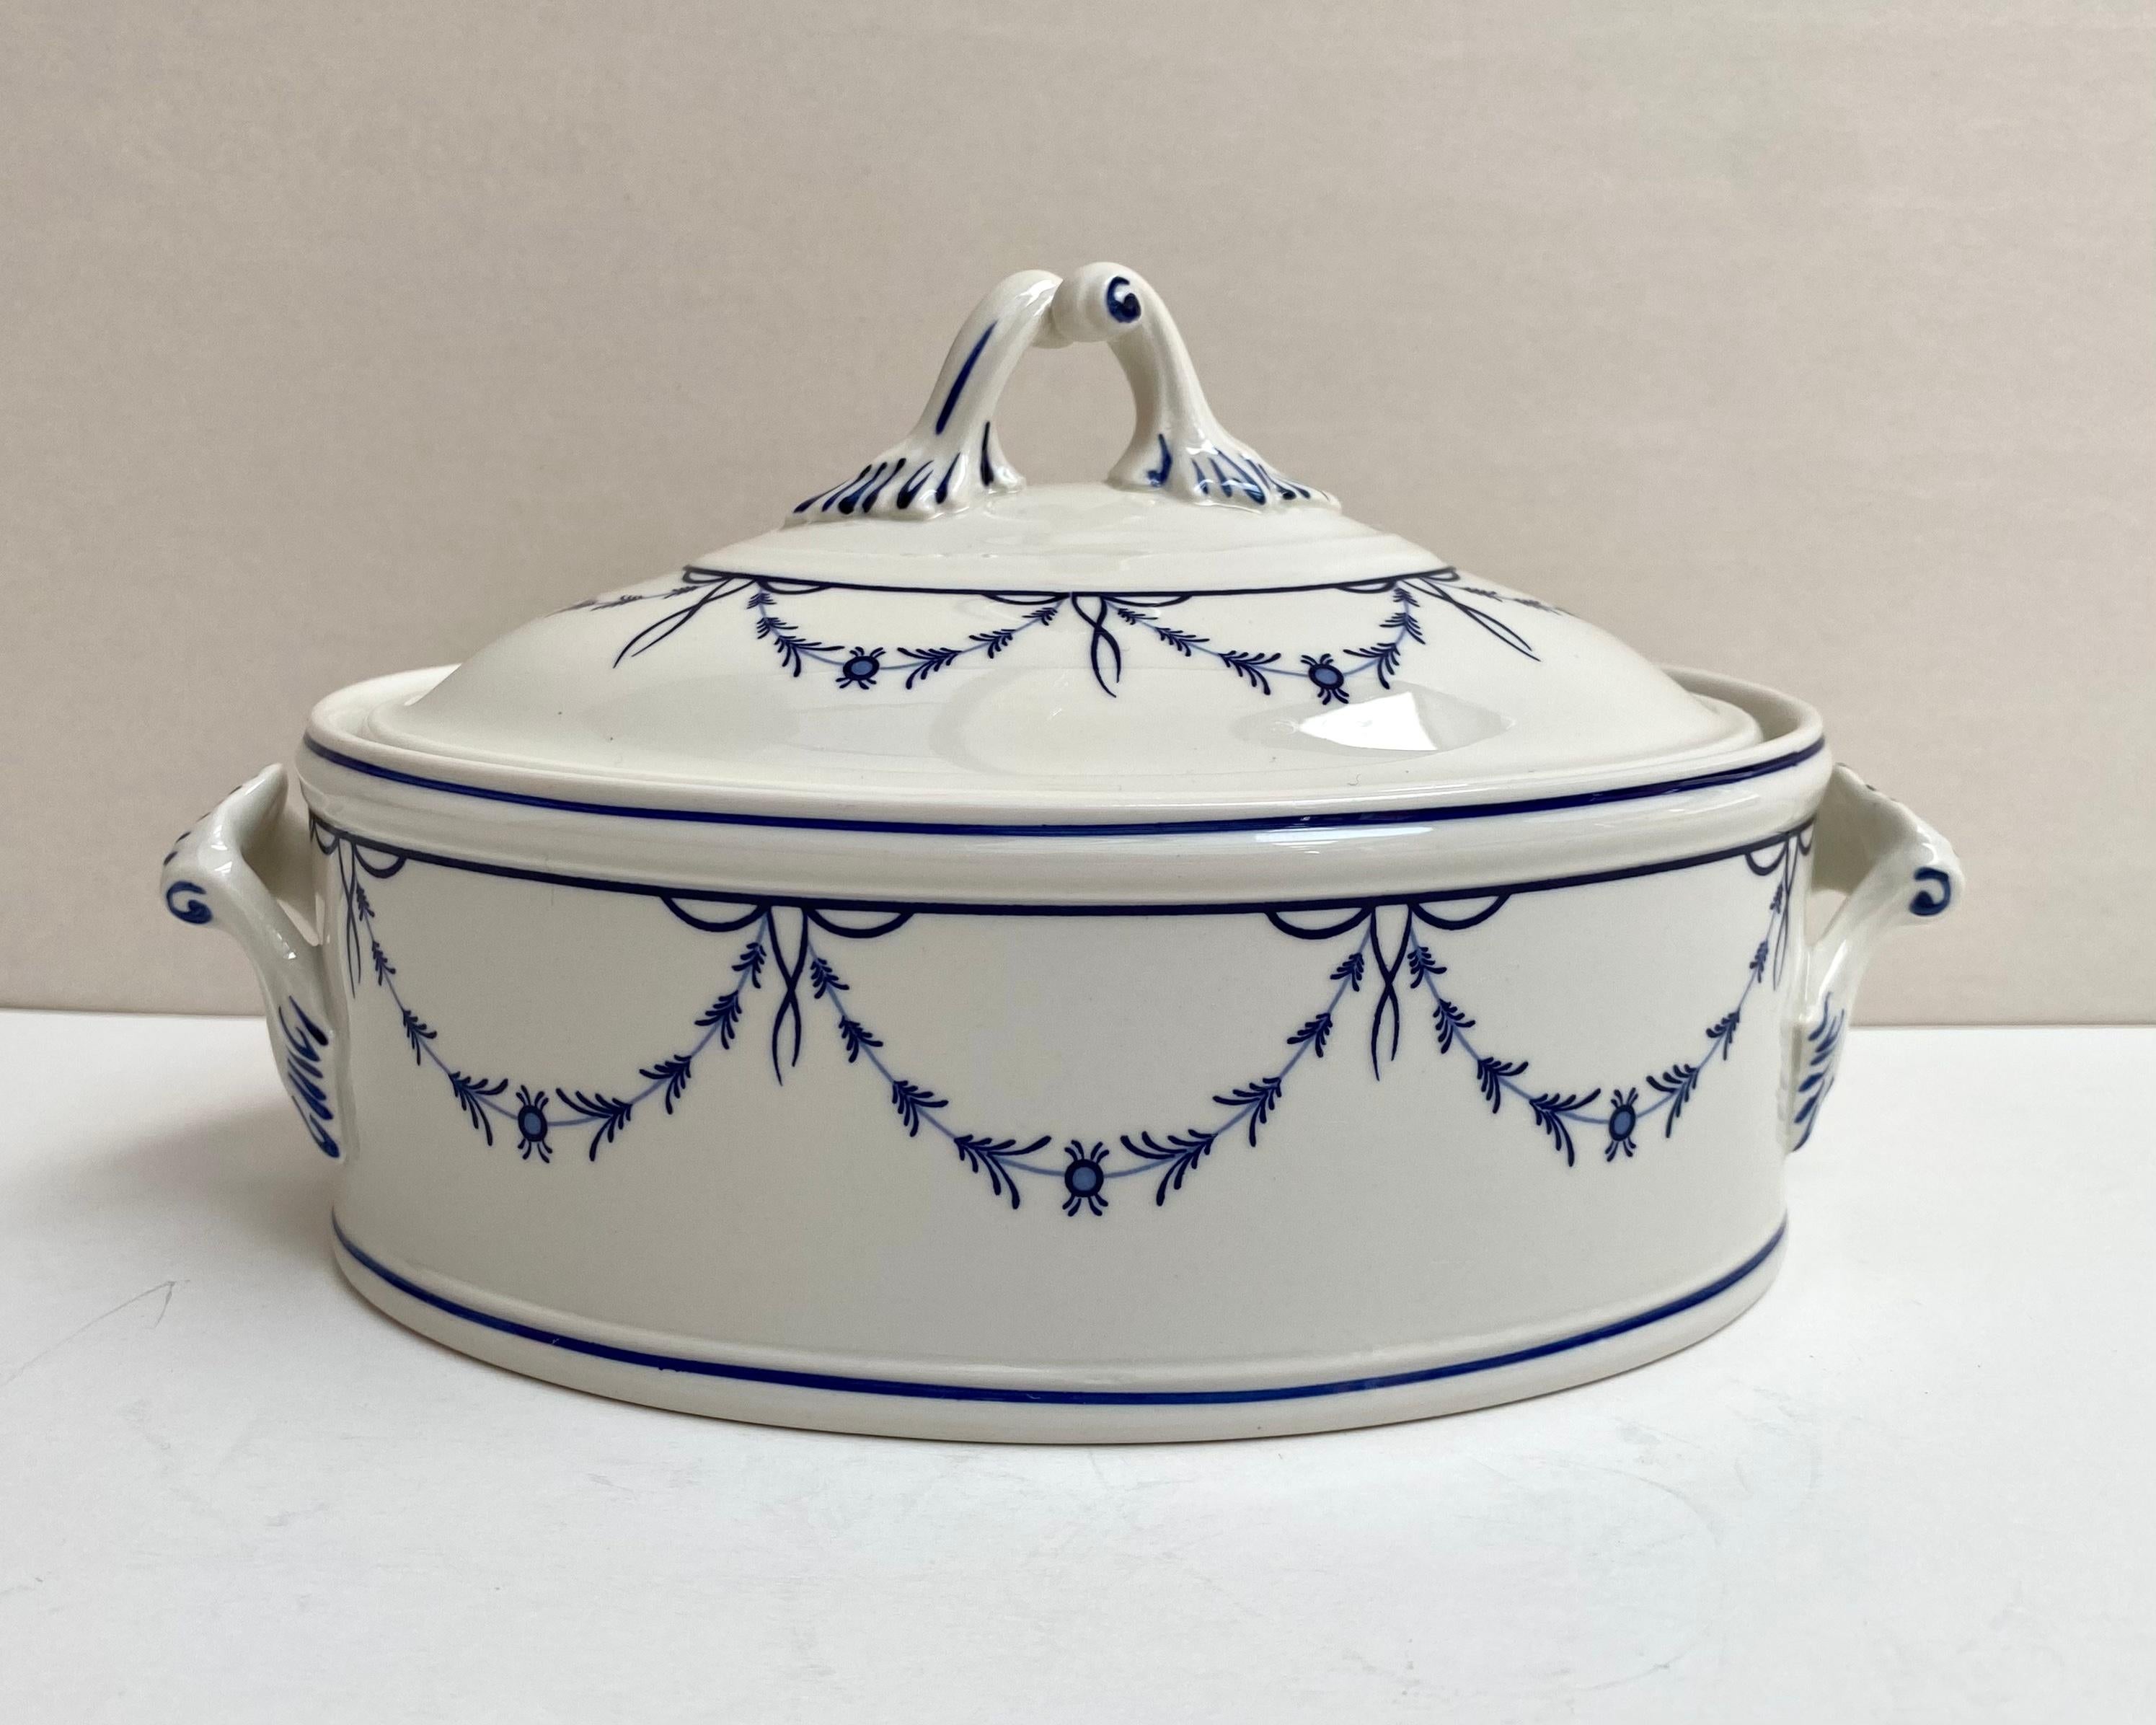 Miniature Oval Tureen with Lid Vieux Septfontaines Villeroy & Boch, Candy Bowl In Excellent Condition For Sale In Bastogne, BE